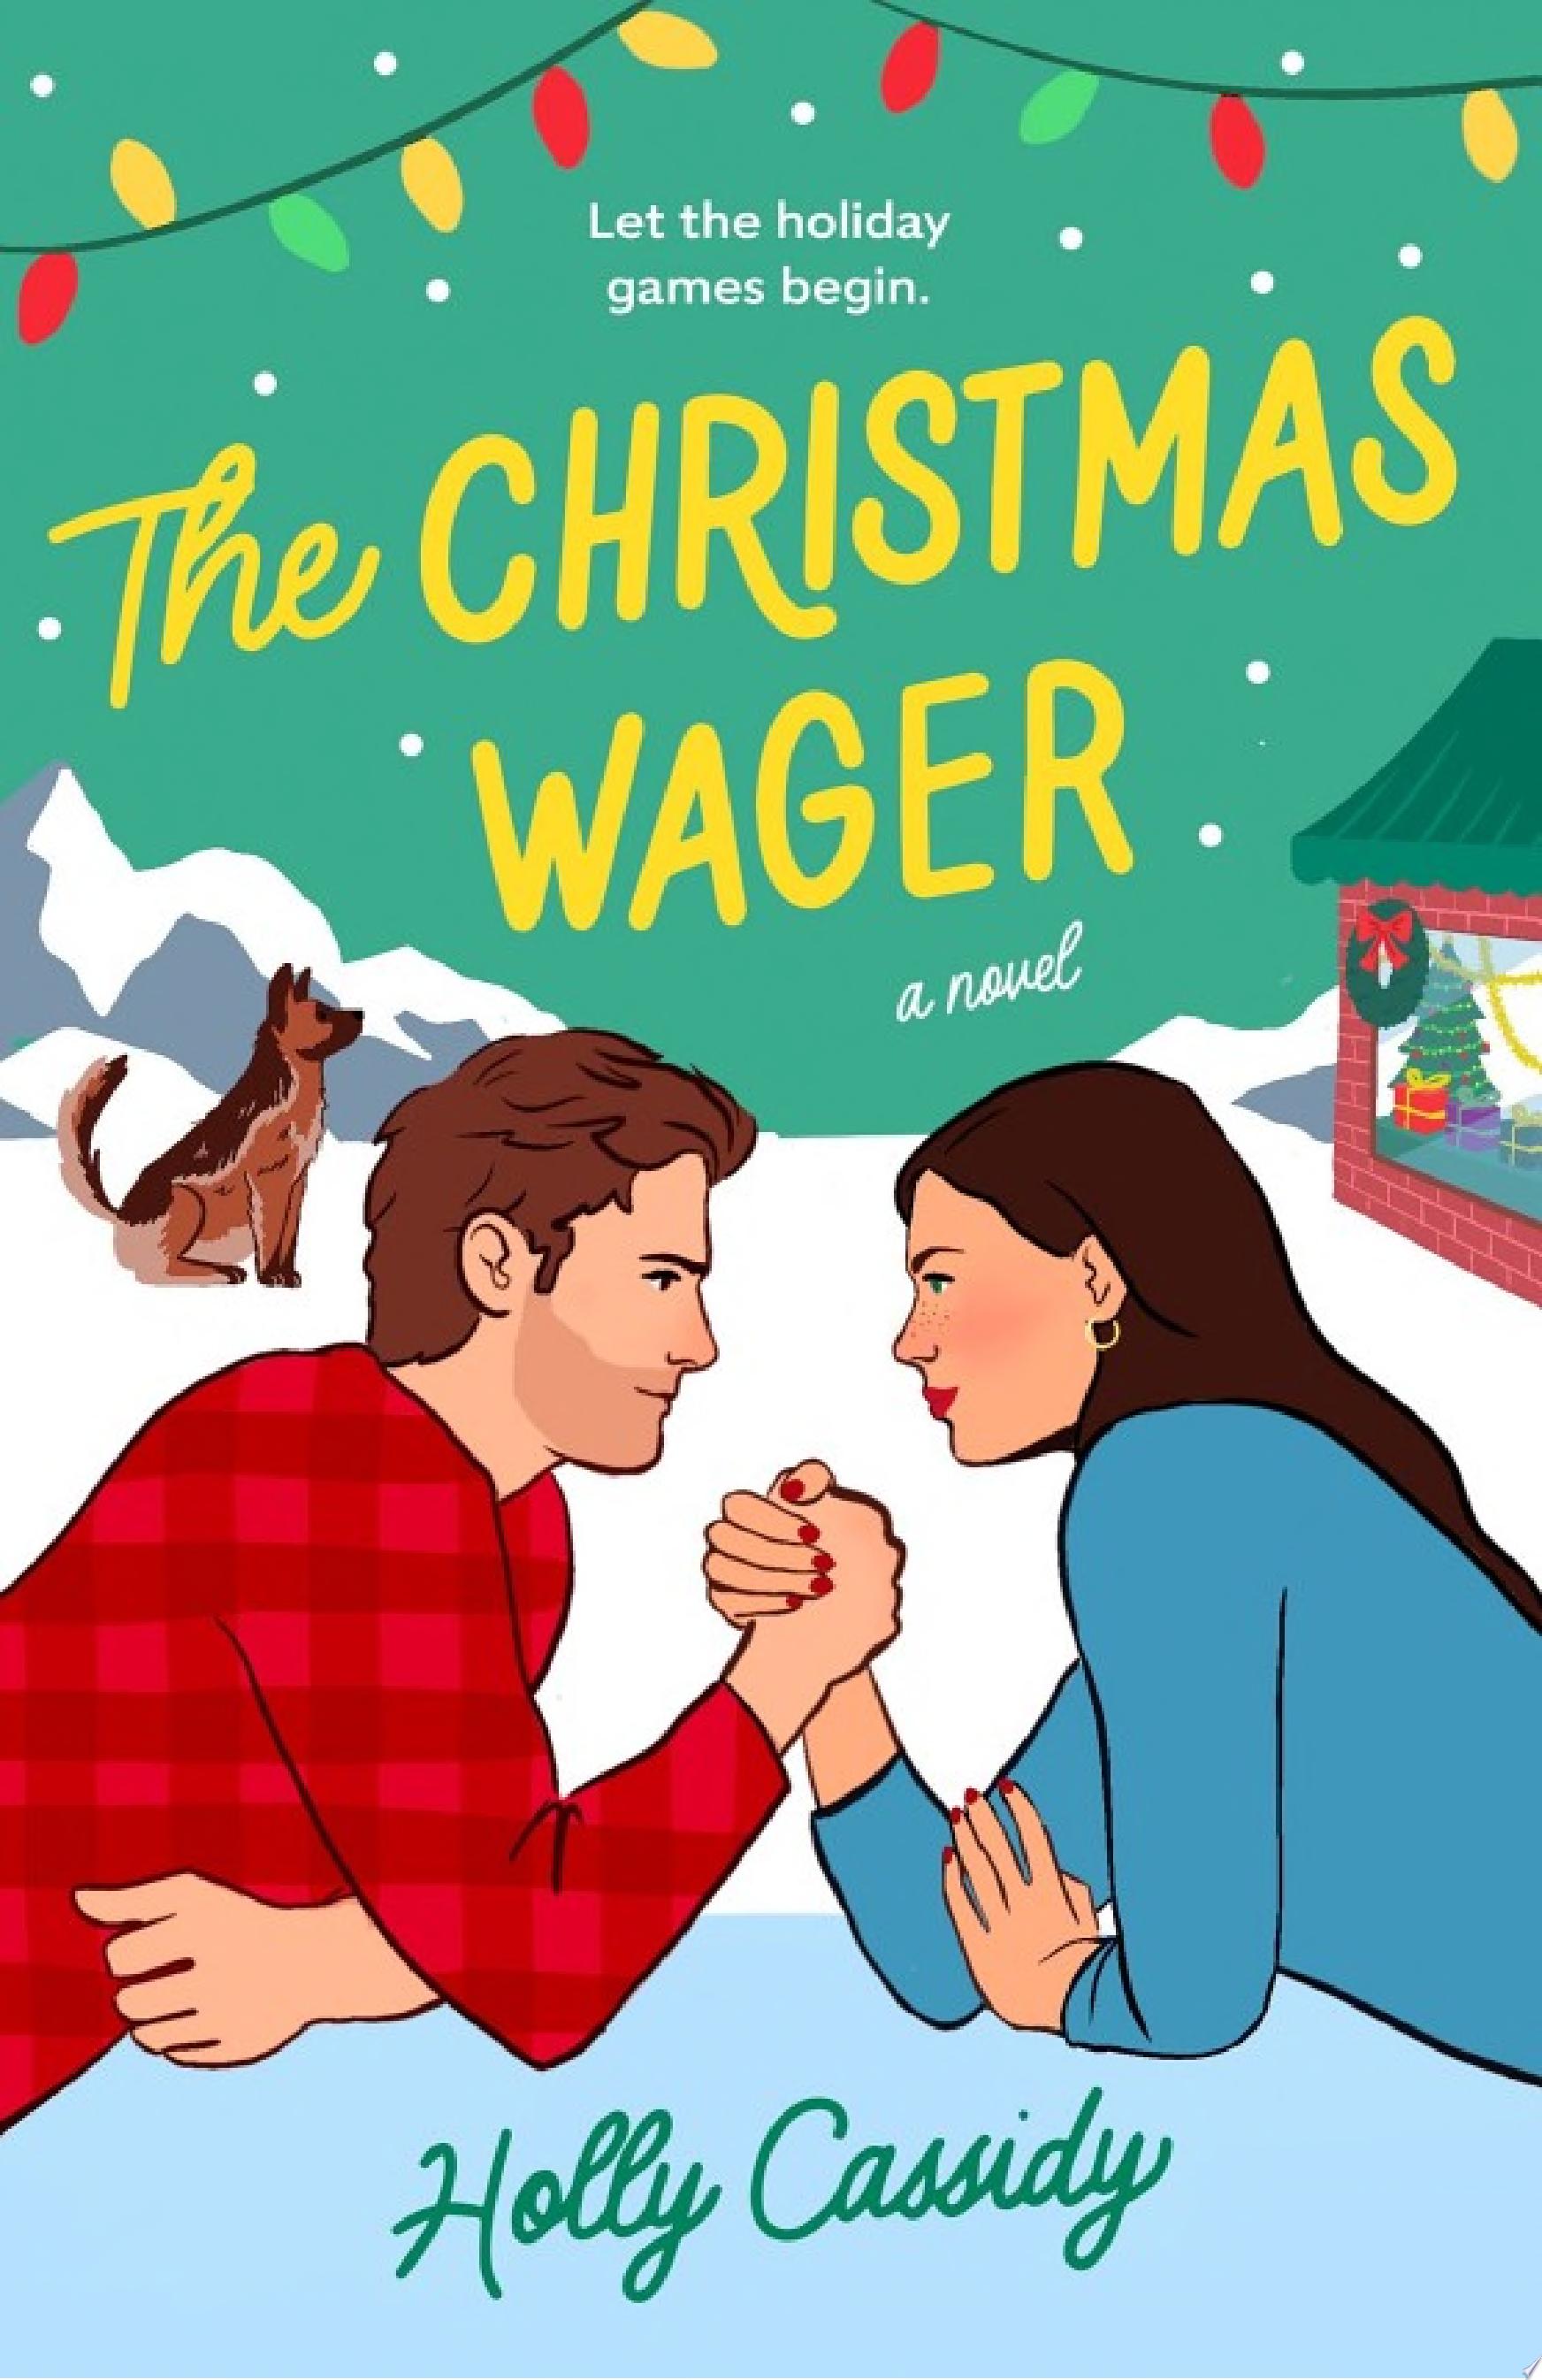 Image for "The Christmas Wager"